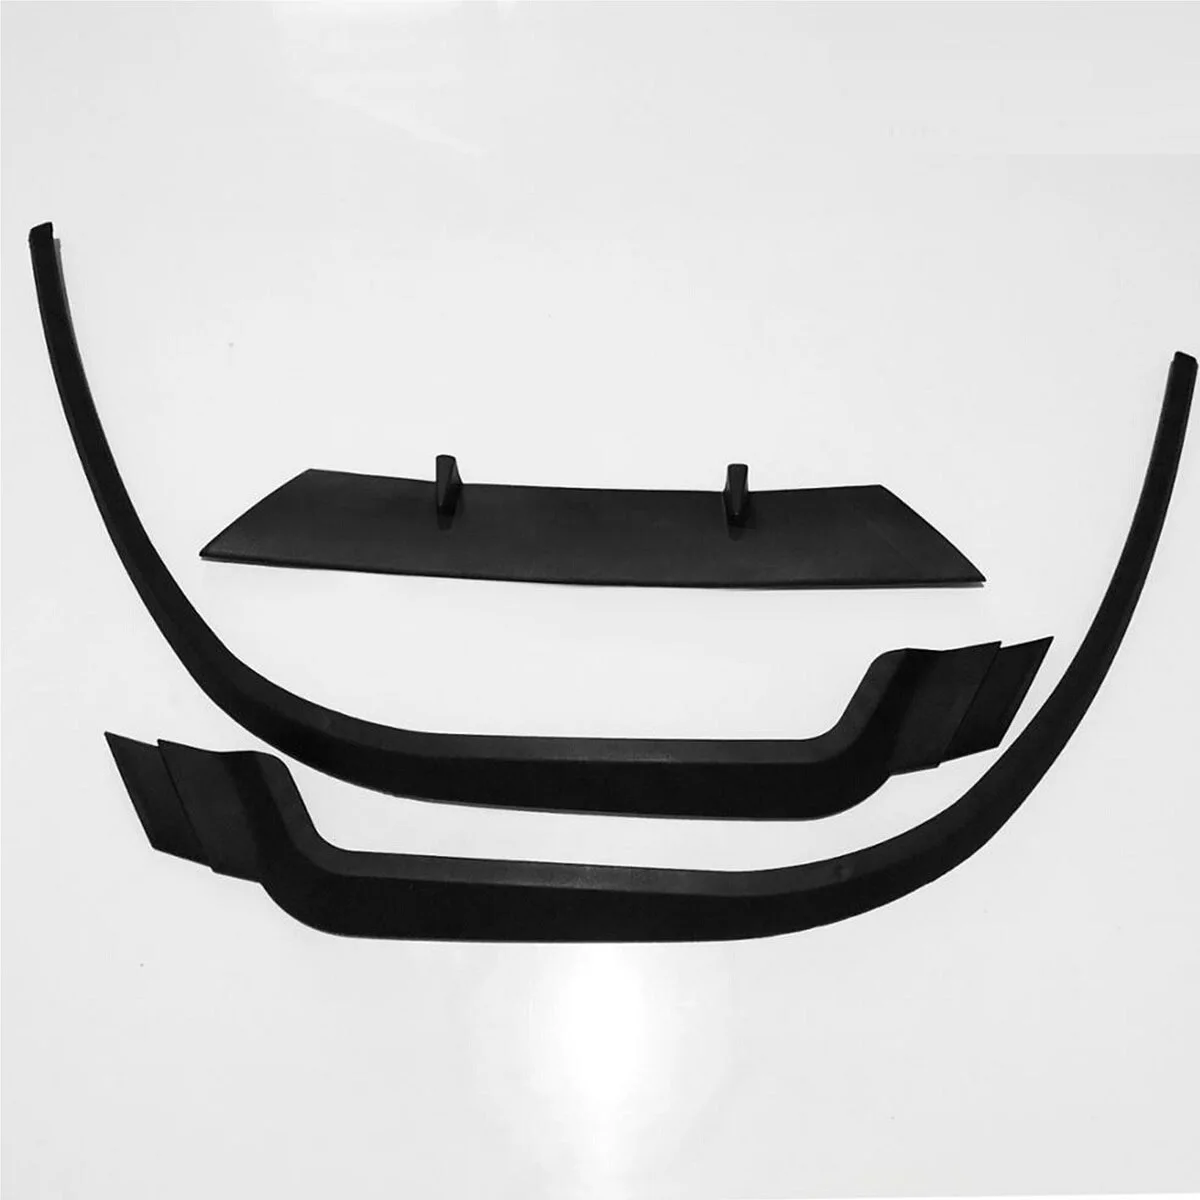 For Audi A4 B7 S4 RS4 FR Front Bumper car accessories automotive products Tuning Spoiler universal exterior body kit front 3 PCs